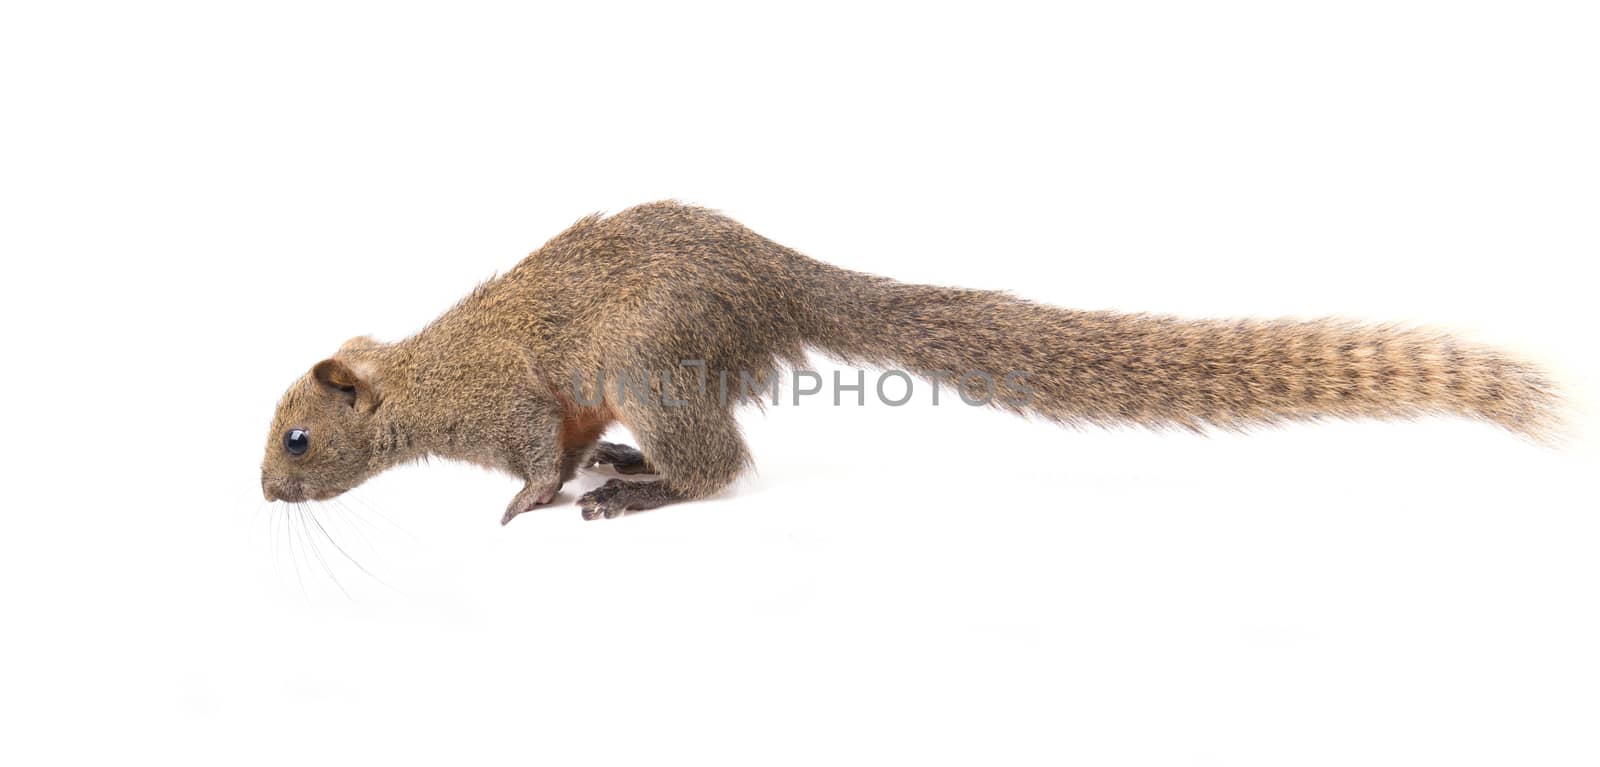 Red-bellied squirrel sit on white background